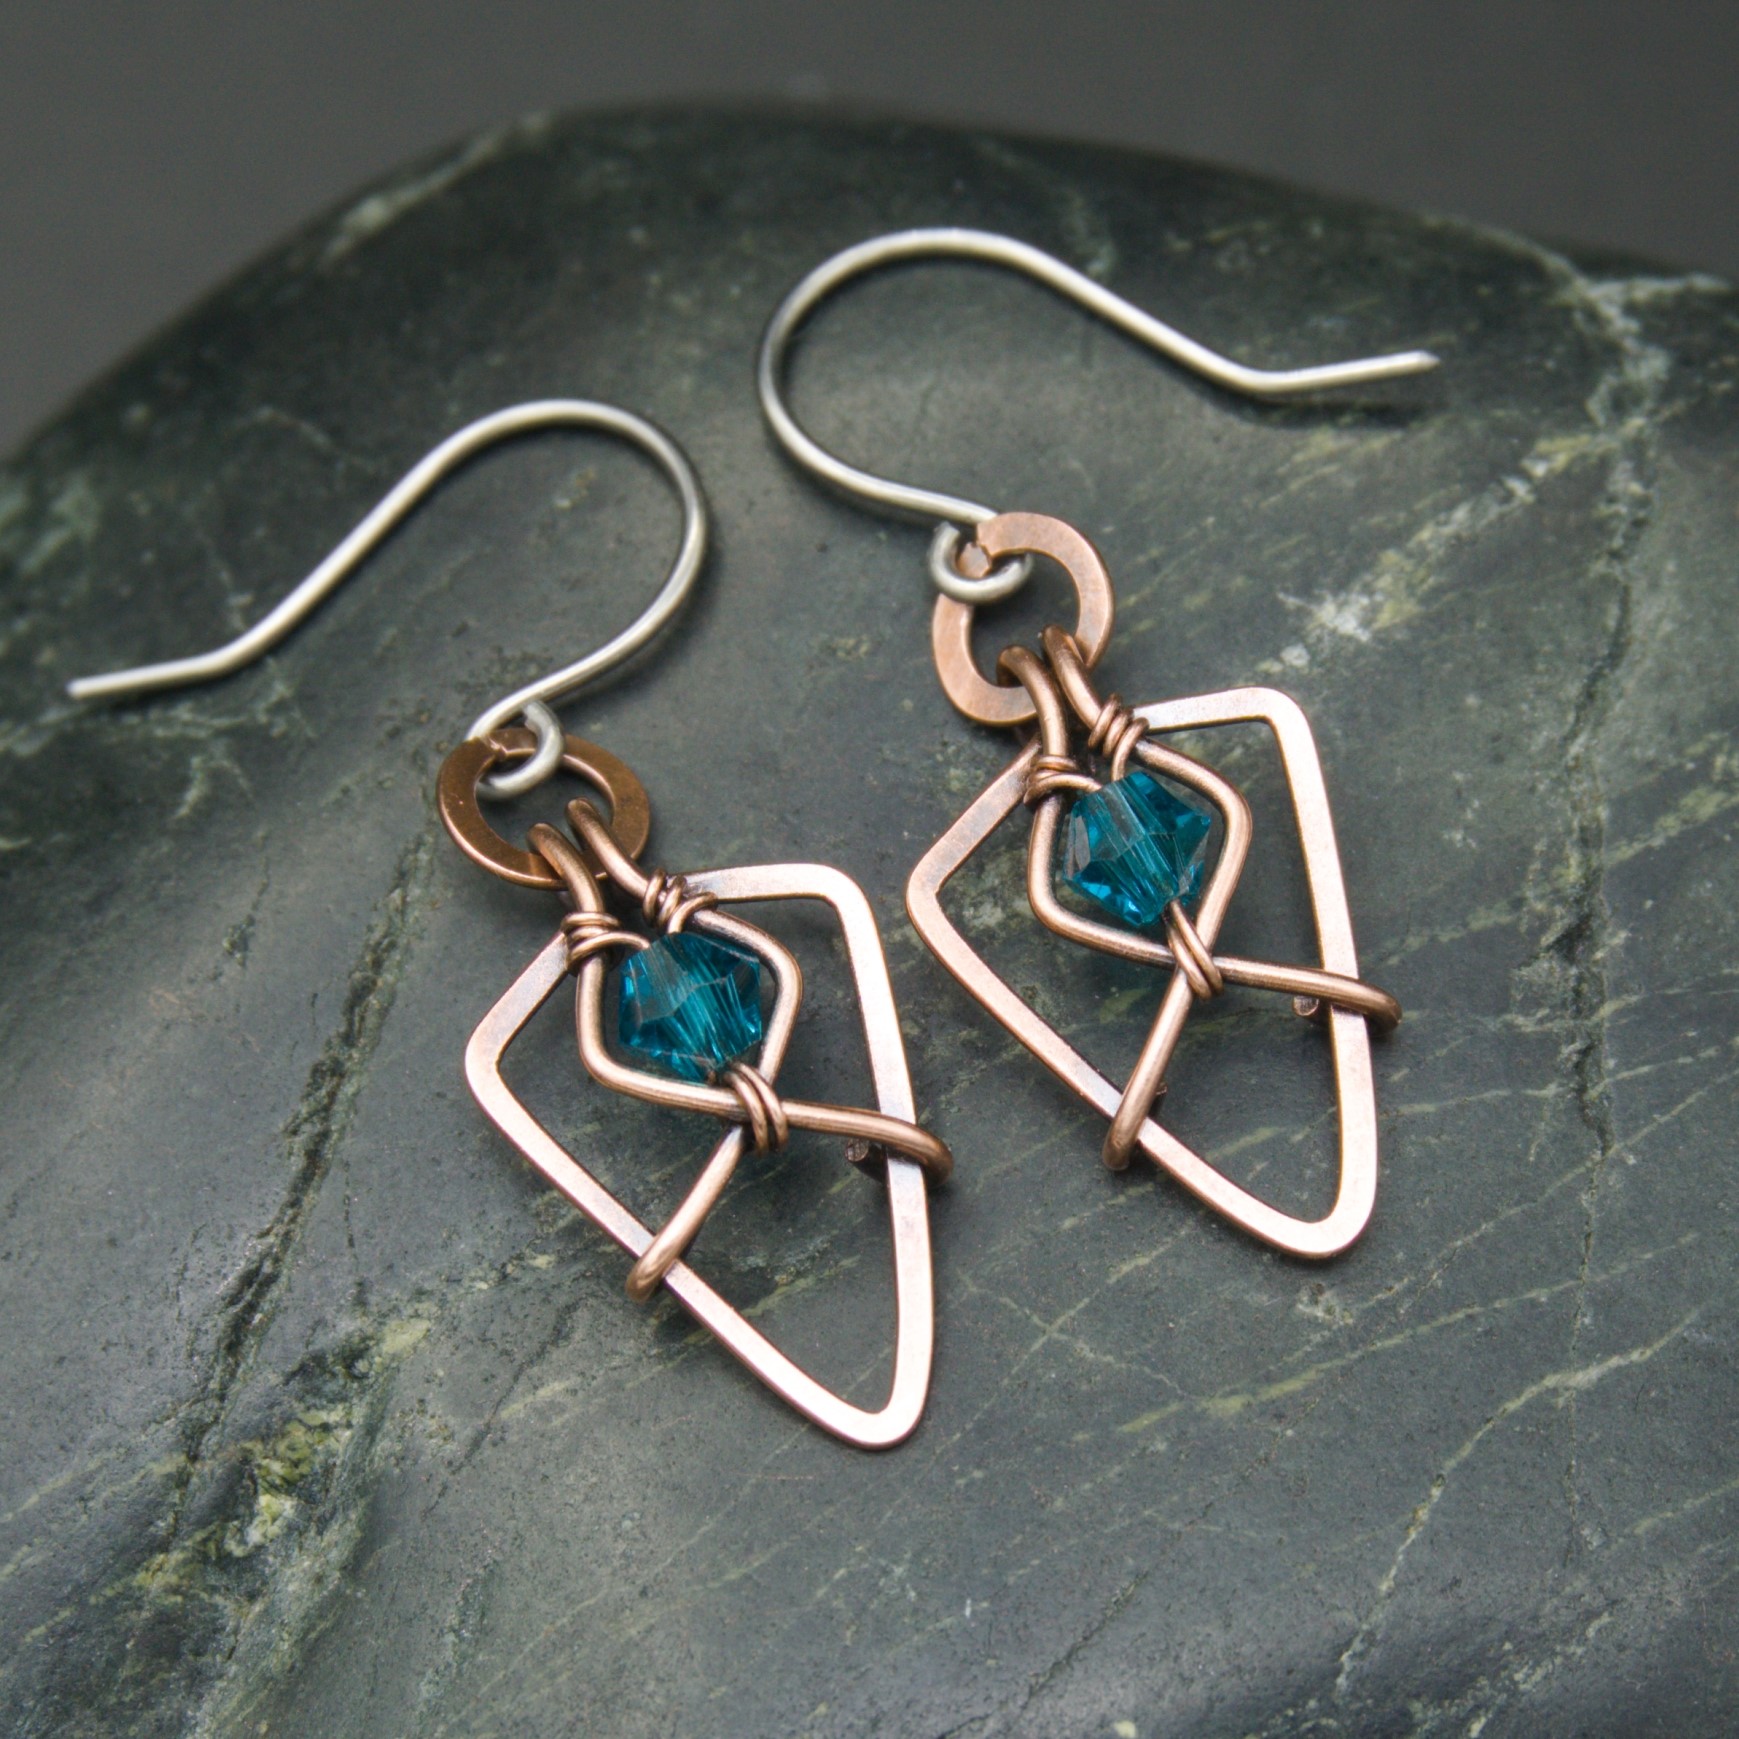 Oruki Design, Hammered copper and turquoise glass beads arrowhead earrings on grey stone